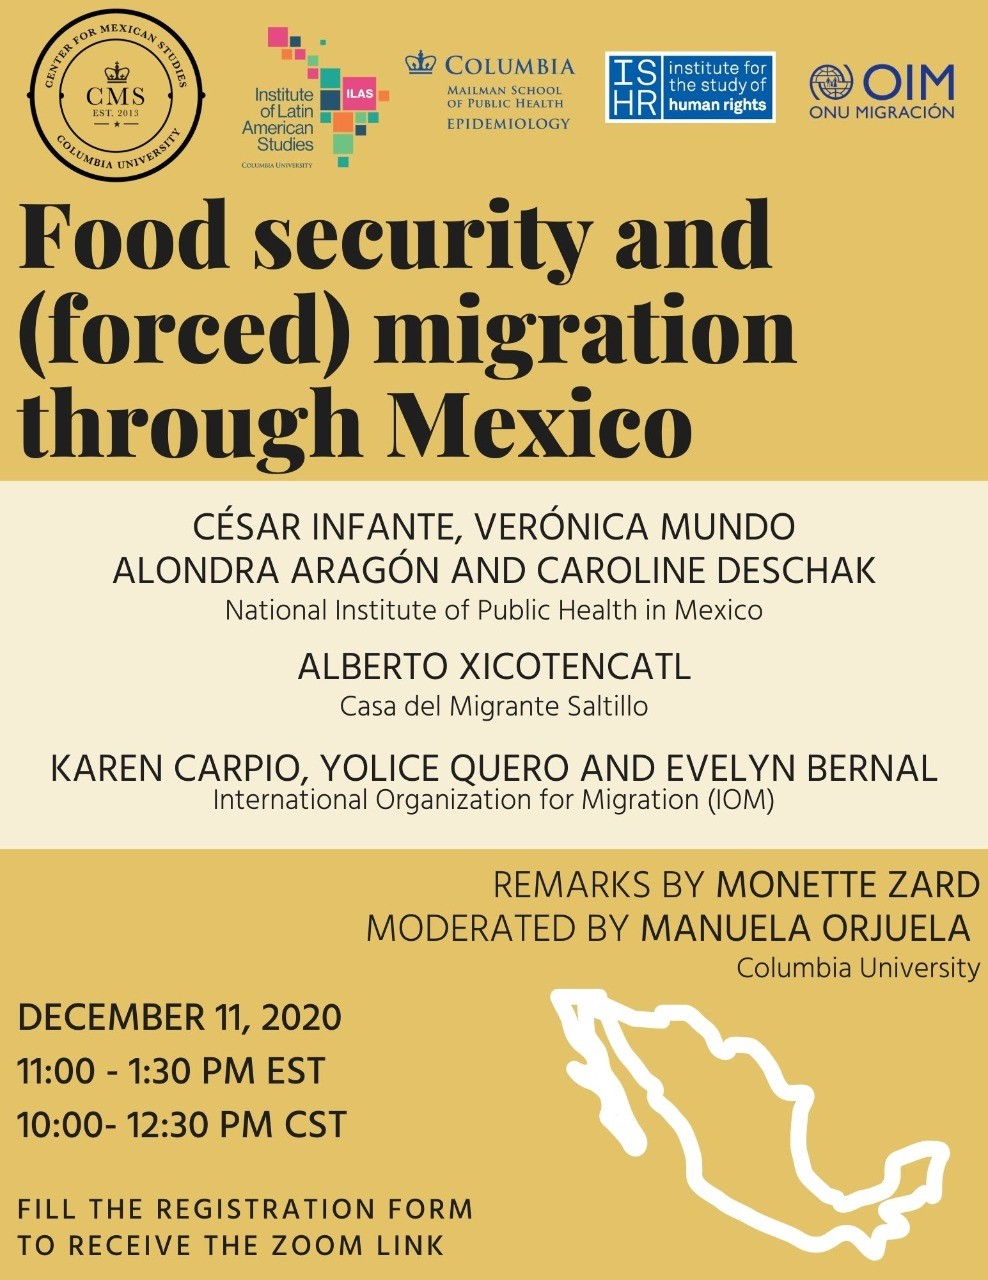 Food Security and Migration Through Mexico Event